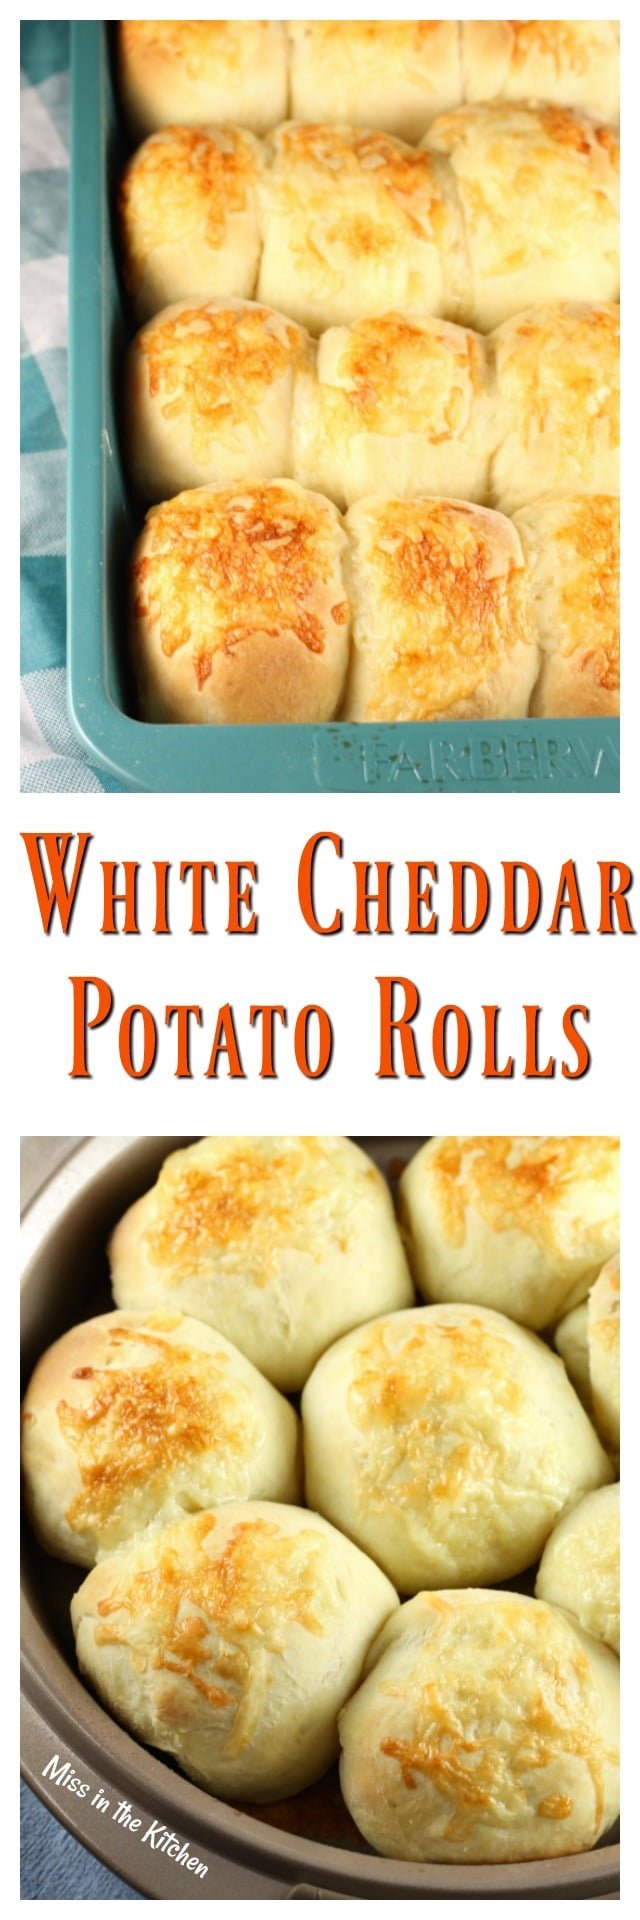 White Cheddar Potato Roll Recipe perfect for the holiday dinners ~ Recipe from MissintheKitchen.com #ad @RedStarYeast